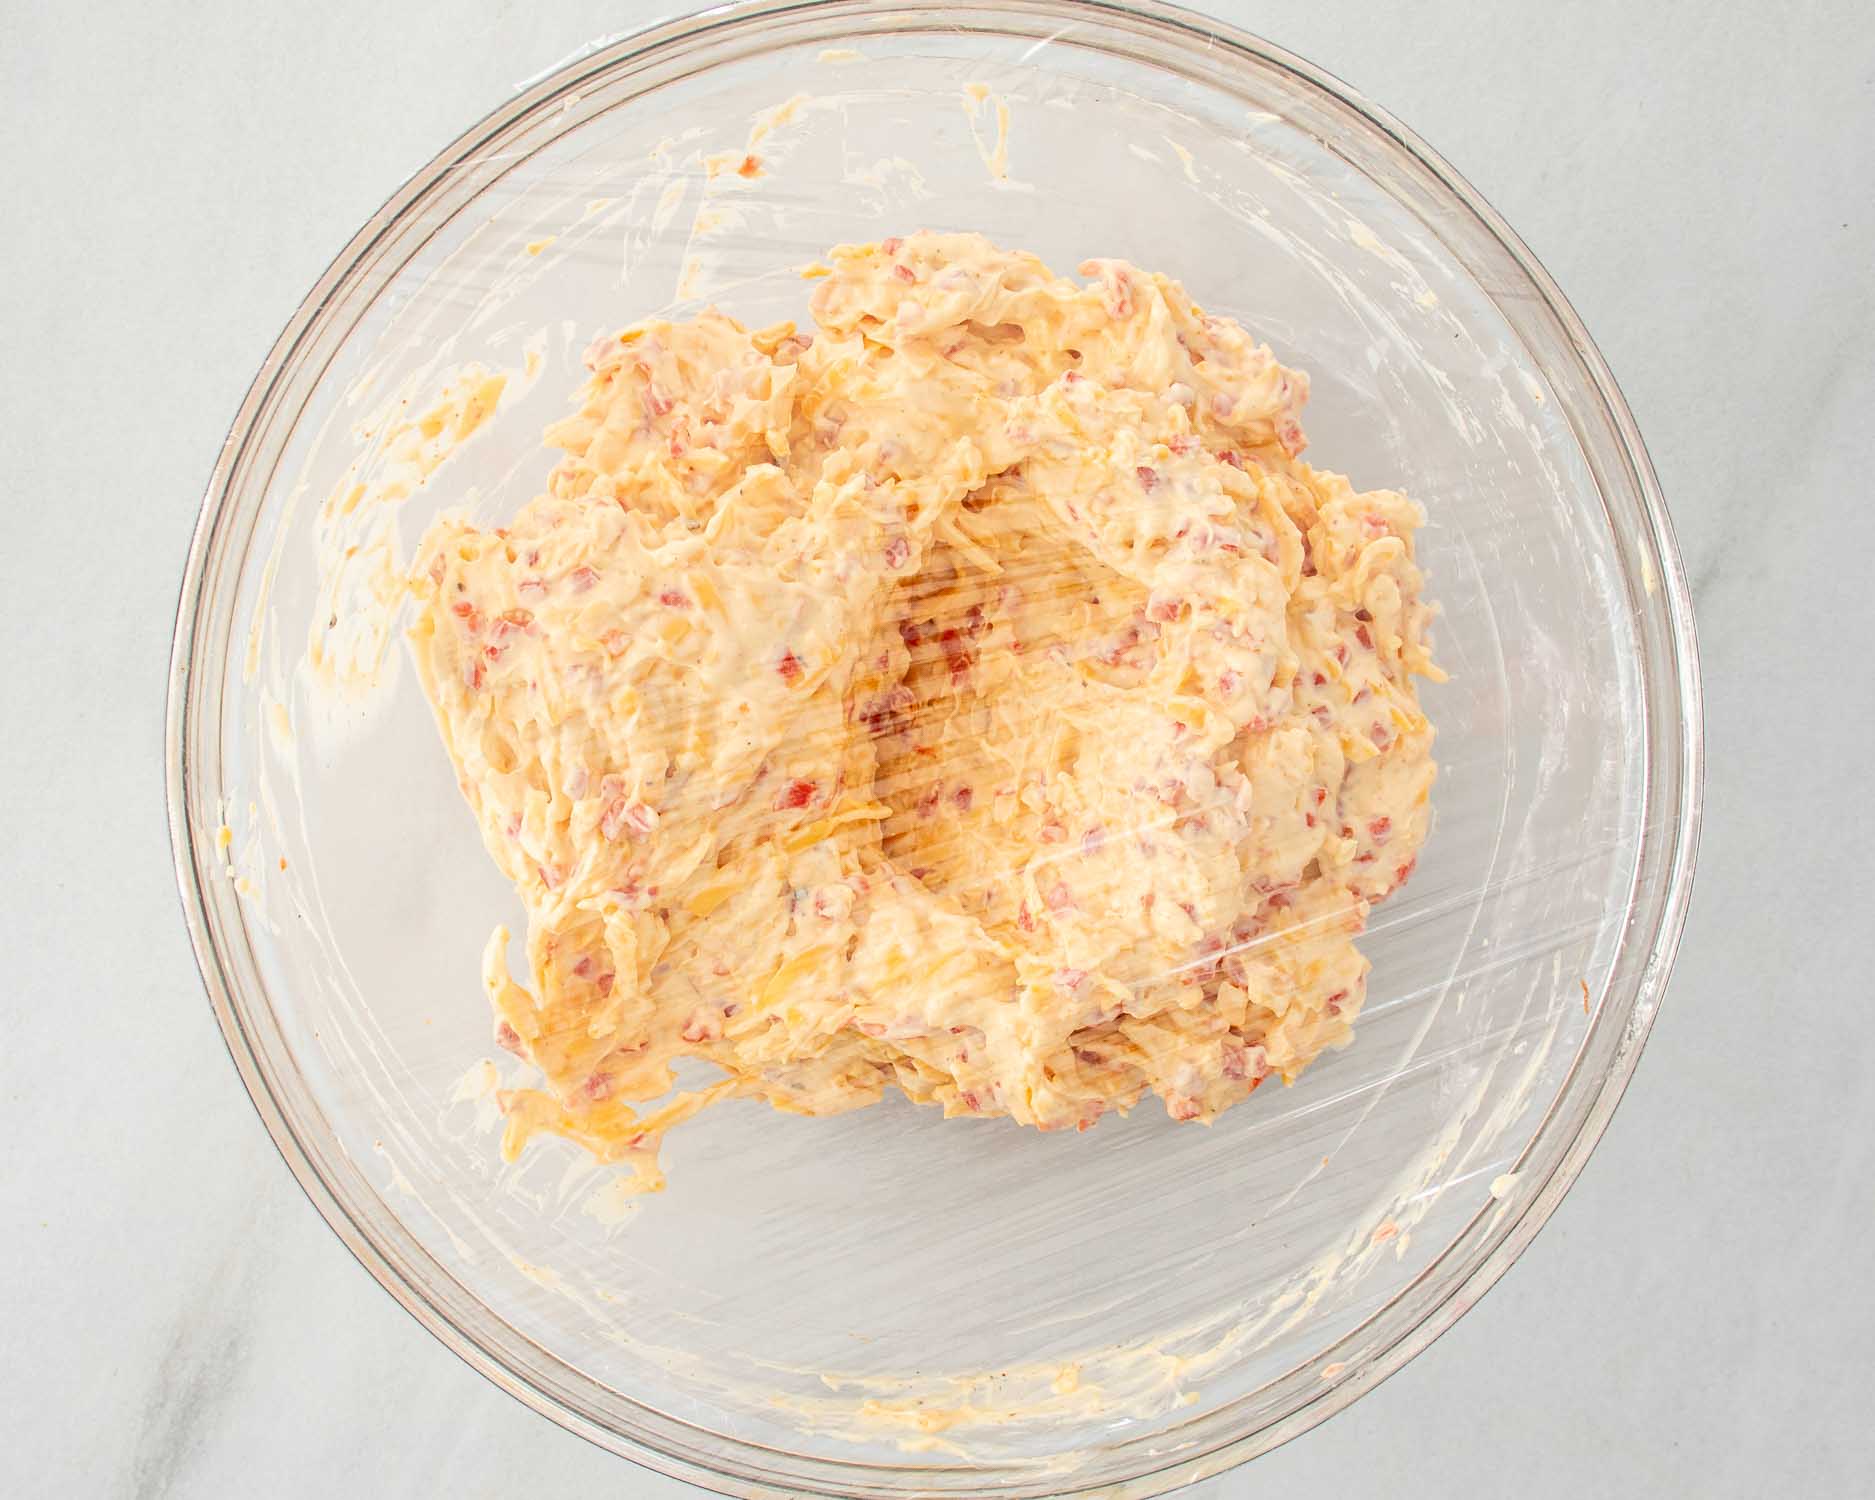 process shots showing how to make pimento cheese.